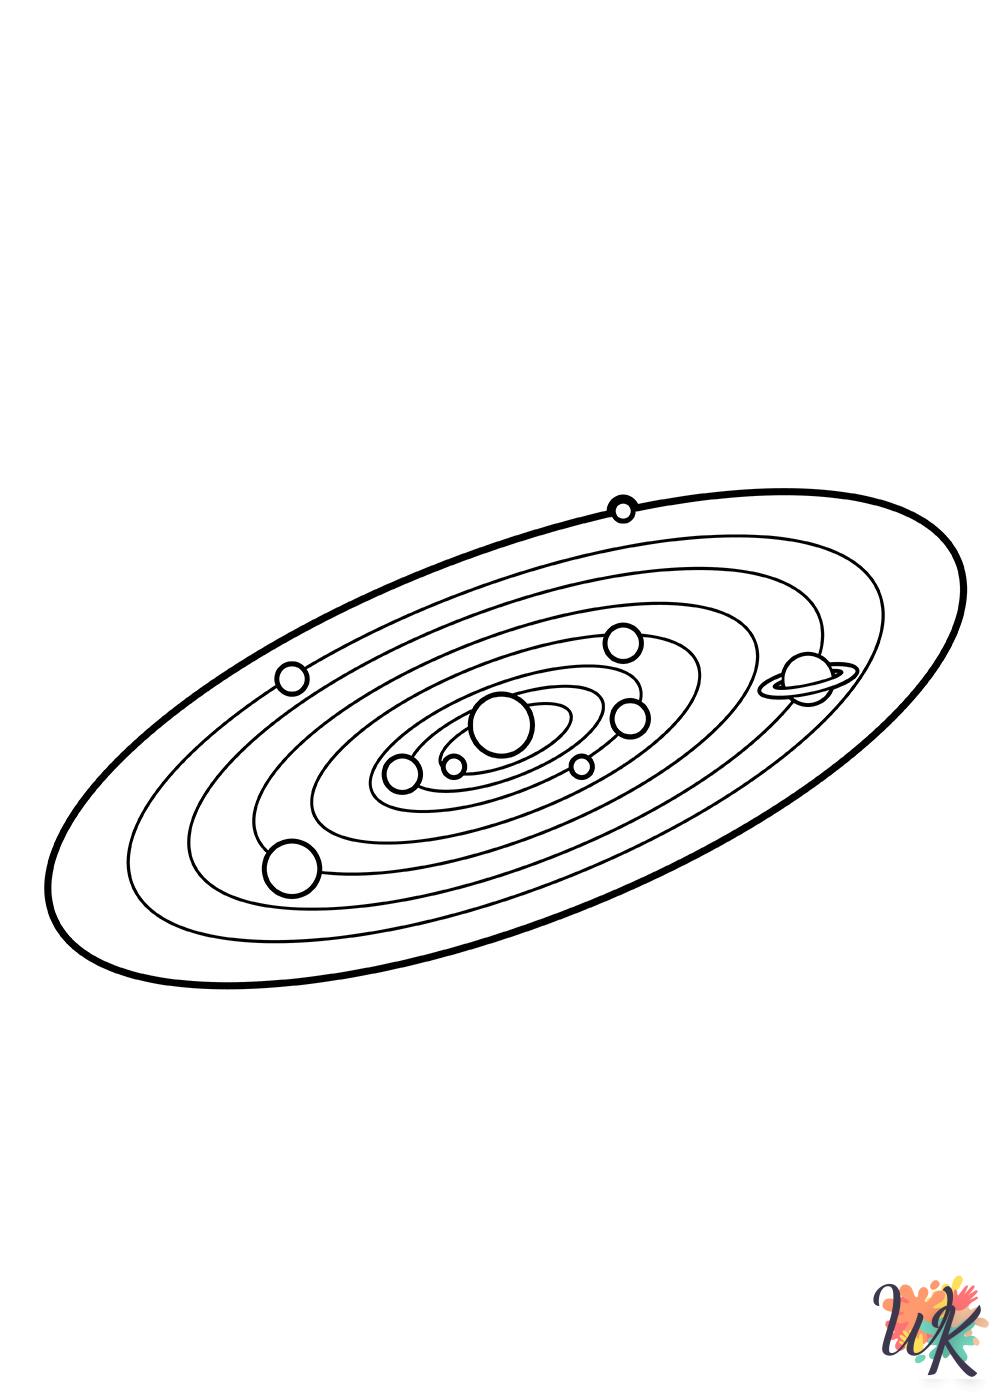 Solar System coloring pages to print